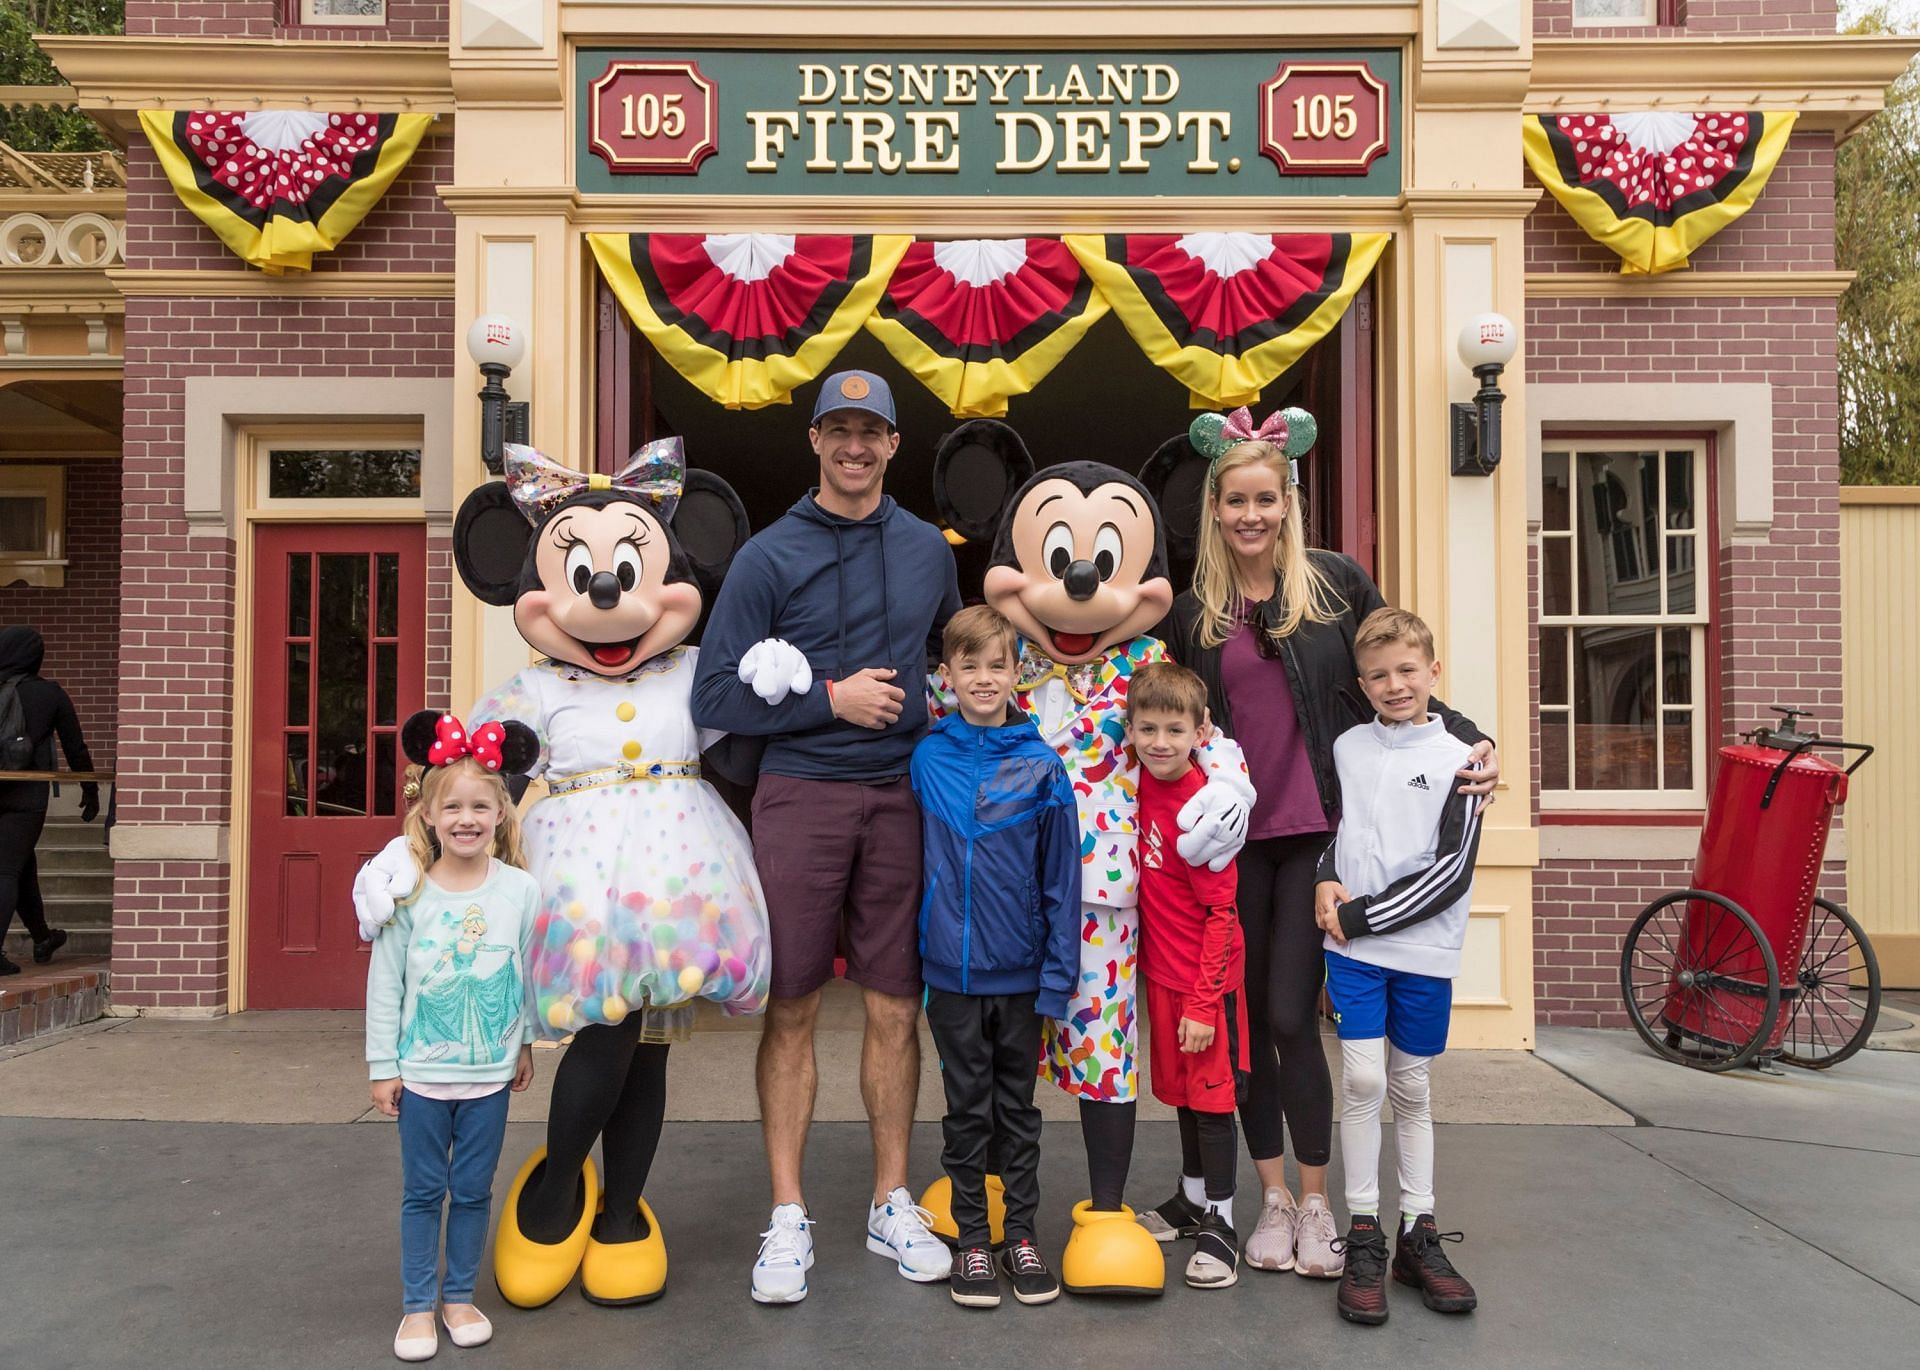 Drew Brees And Family Celebrate Vacation With Mickey Mouse And Minnie Mouse At Disneyland Park